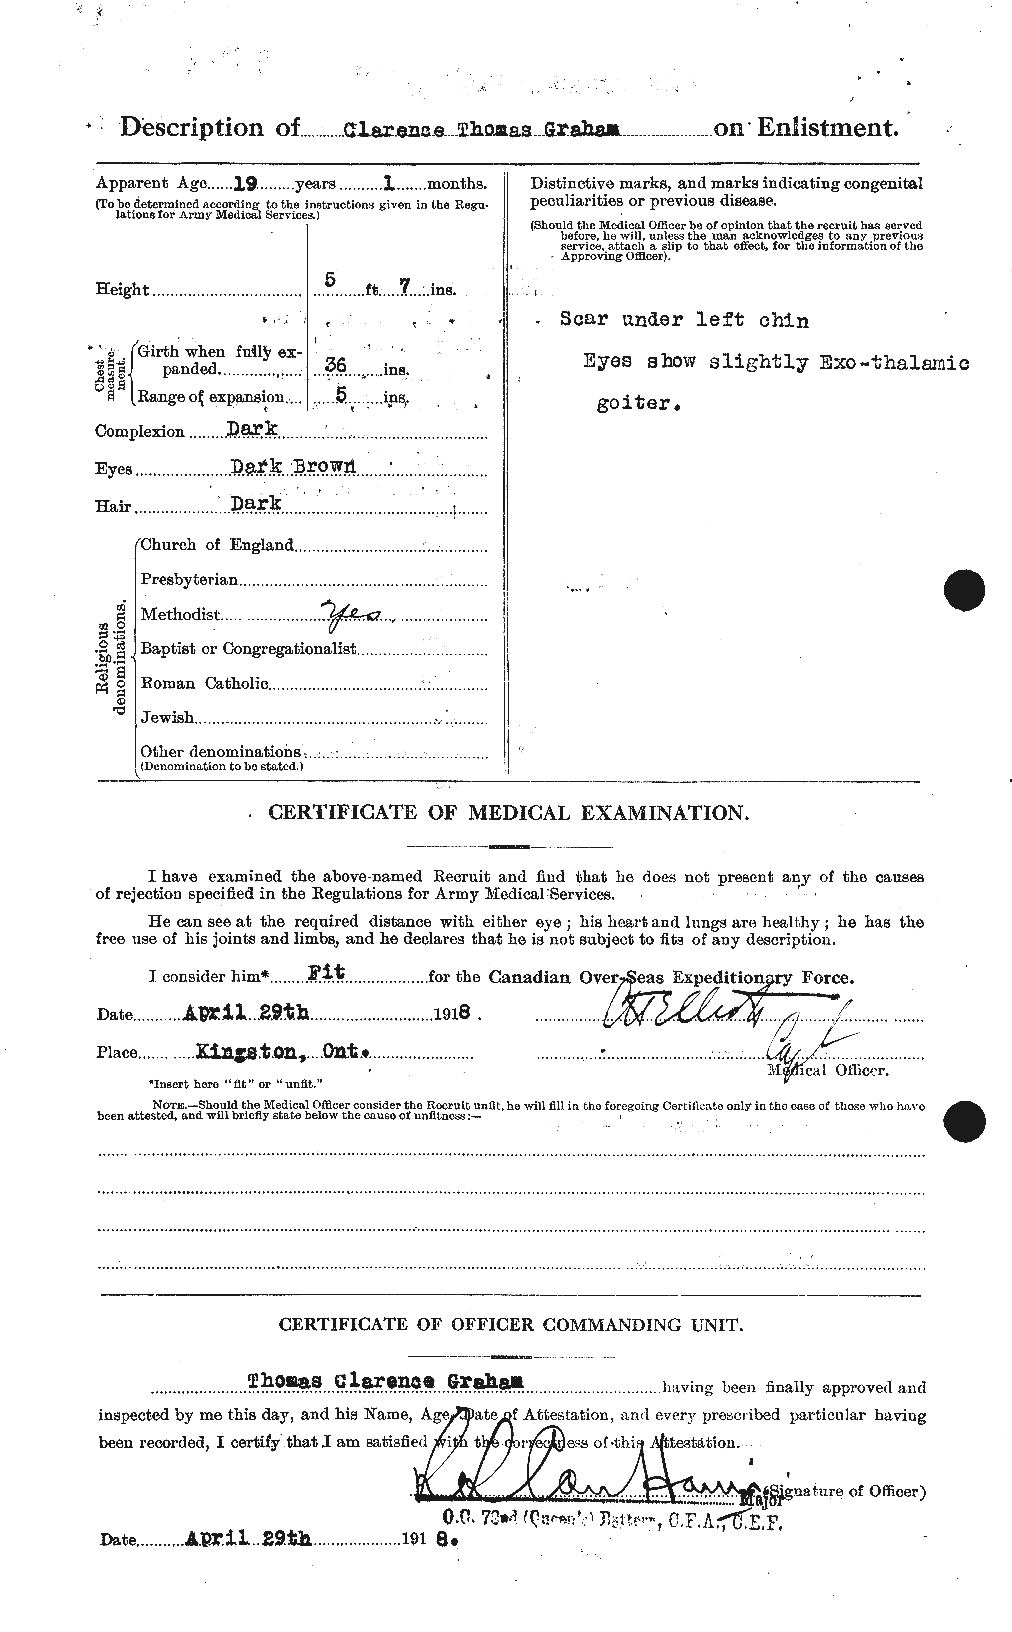 Personnel Records of the First World War - CEF 359512b